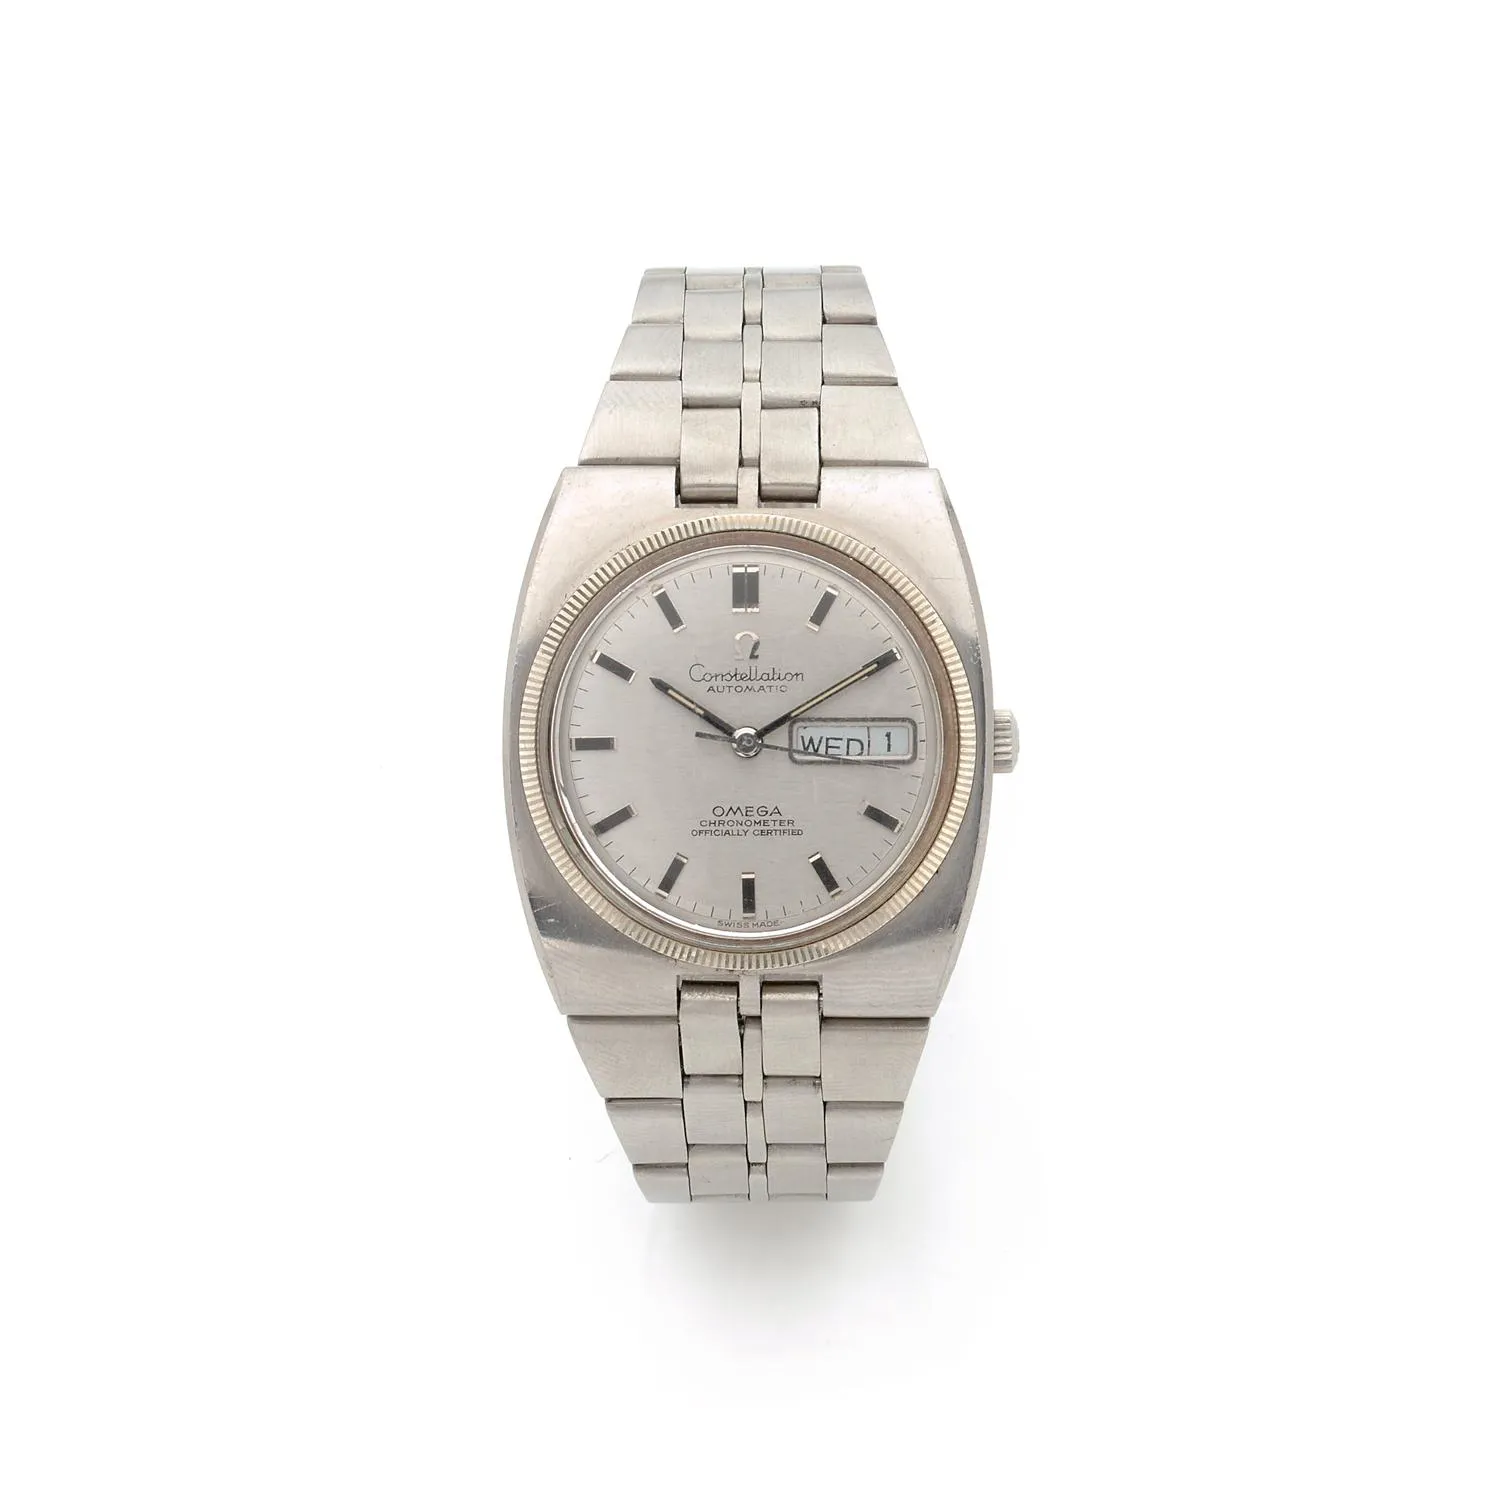 Omega Constellation Day-Date 168.045-368.845 40mm Stainless steel White